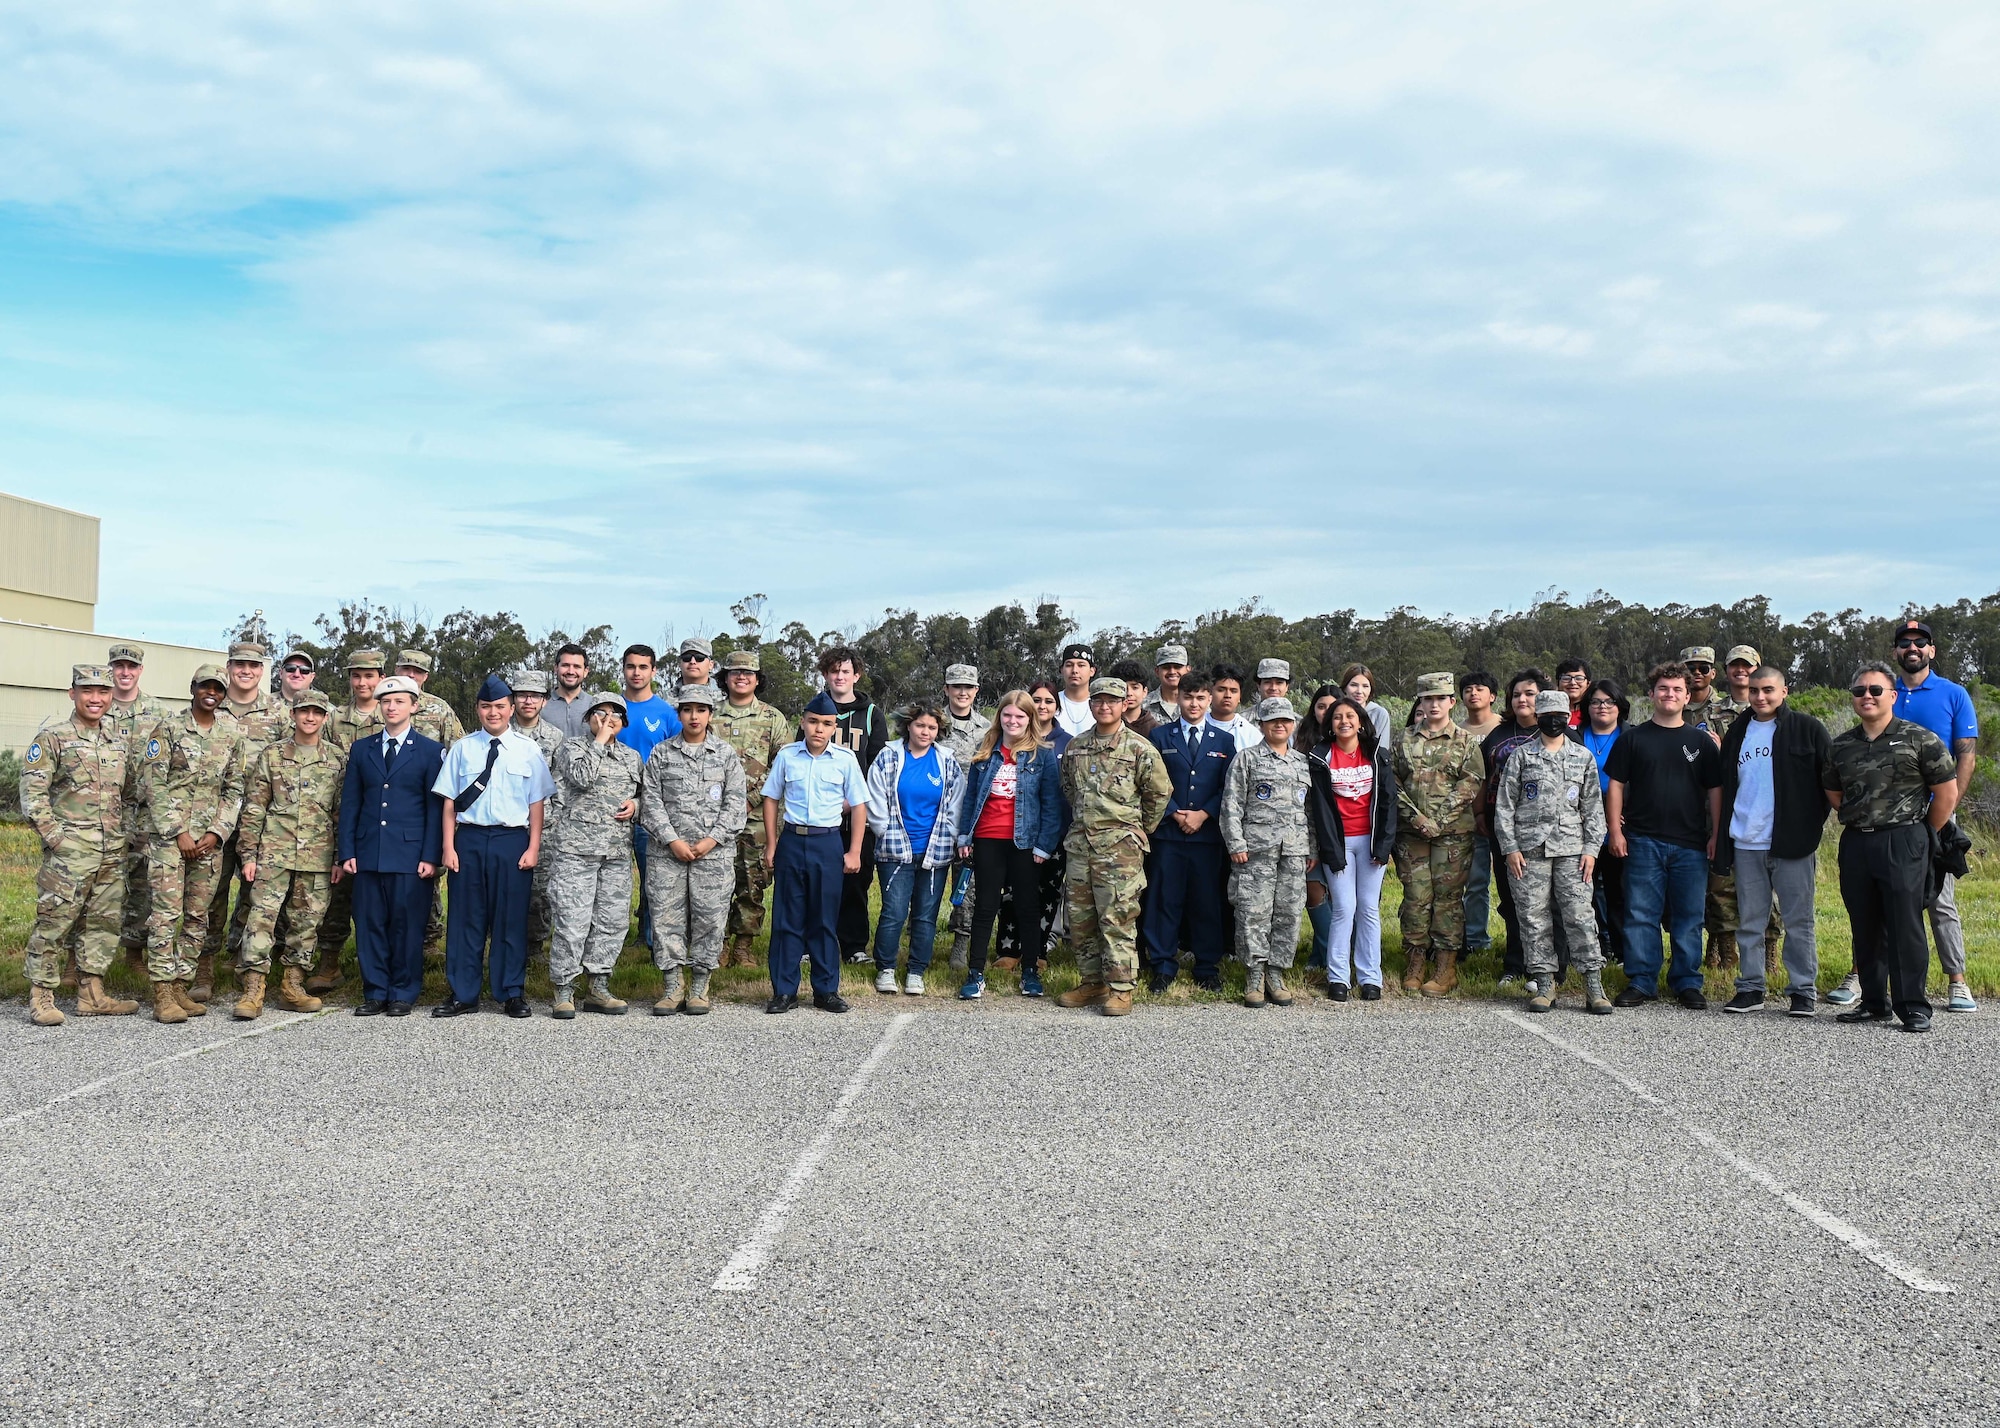 Military members from the 2nd Space Launch Squadron and Oxnard High School JROTC cadets pose for a group photo during a tour at Vandenberg Space Force Base.